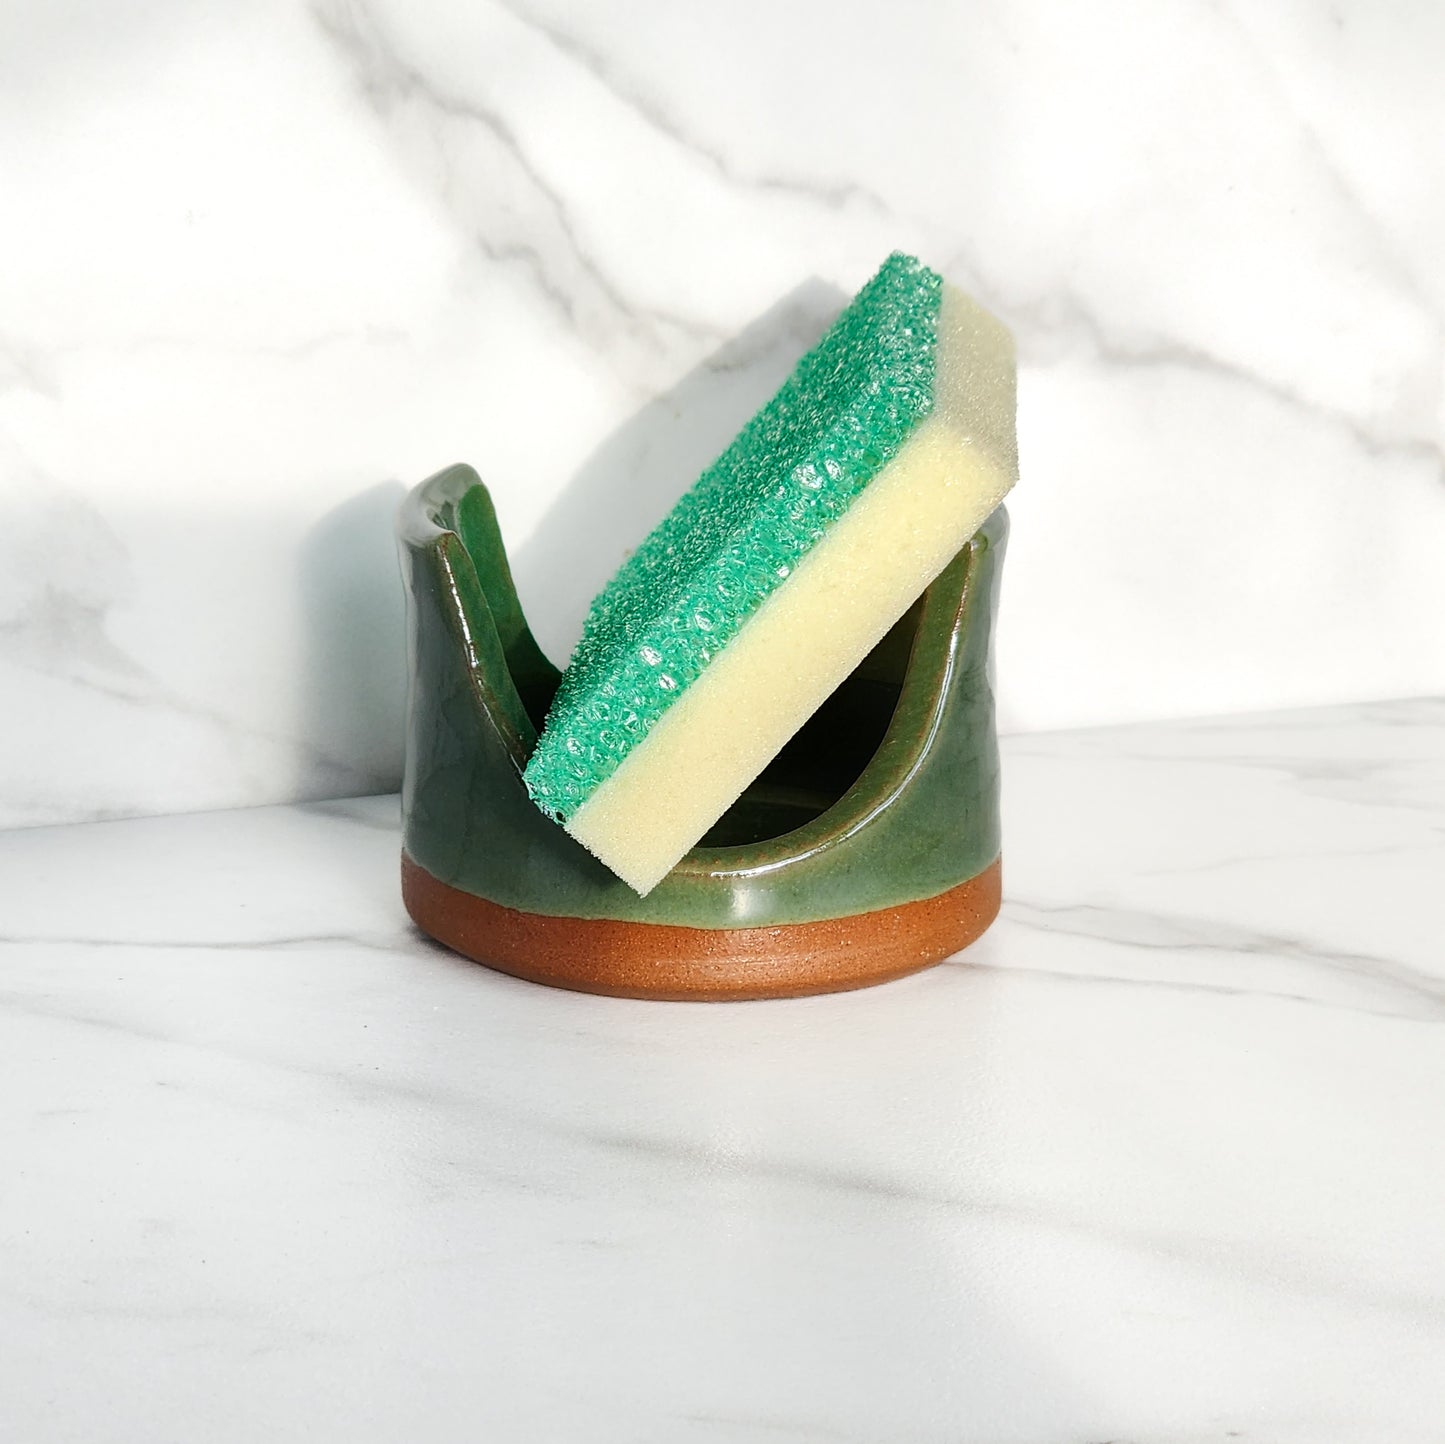 Image: Clinton Pottery's Handmade Sponge Holder in Dark Green – A rich and practical kitchen accessory, skillfully crafted by artisans. This durable stoneware holder, in deep Dark Green, brings a sense of natural elegance to your kitchen, reminiscent of lush forests and tranquility. Designed to securely hold your sponge and prevent water spread, it keeps your counters and sink area tidy.